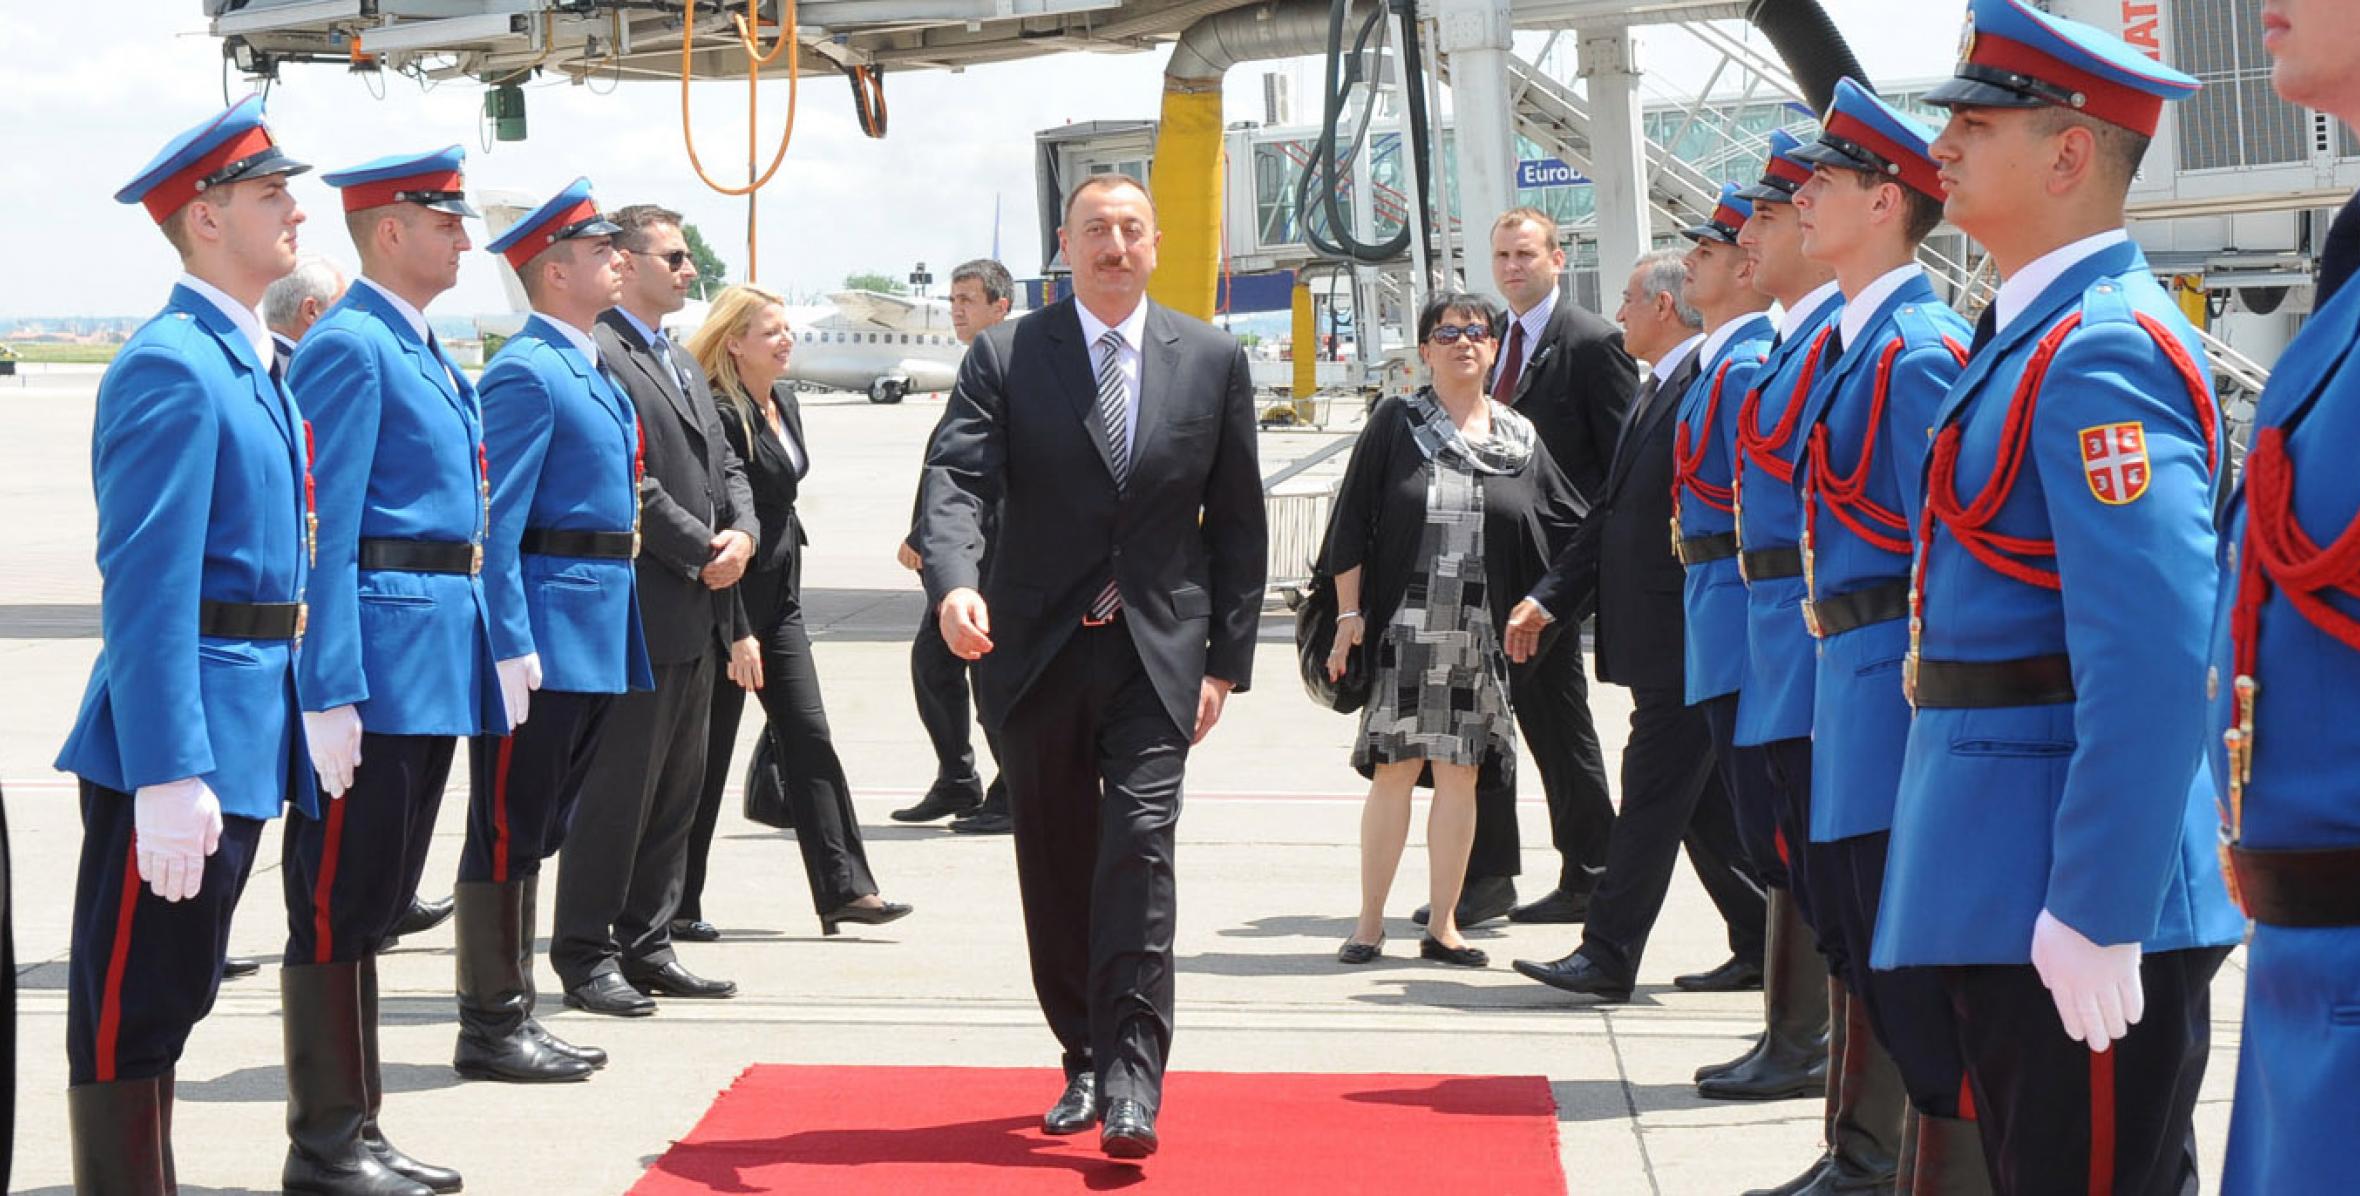 Ilham Aliyev’s official visit to Serbia is over